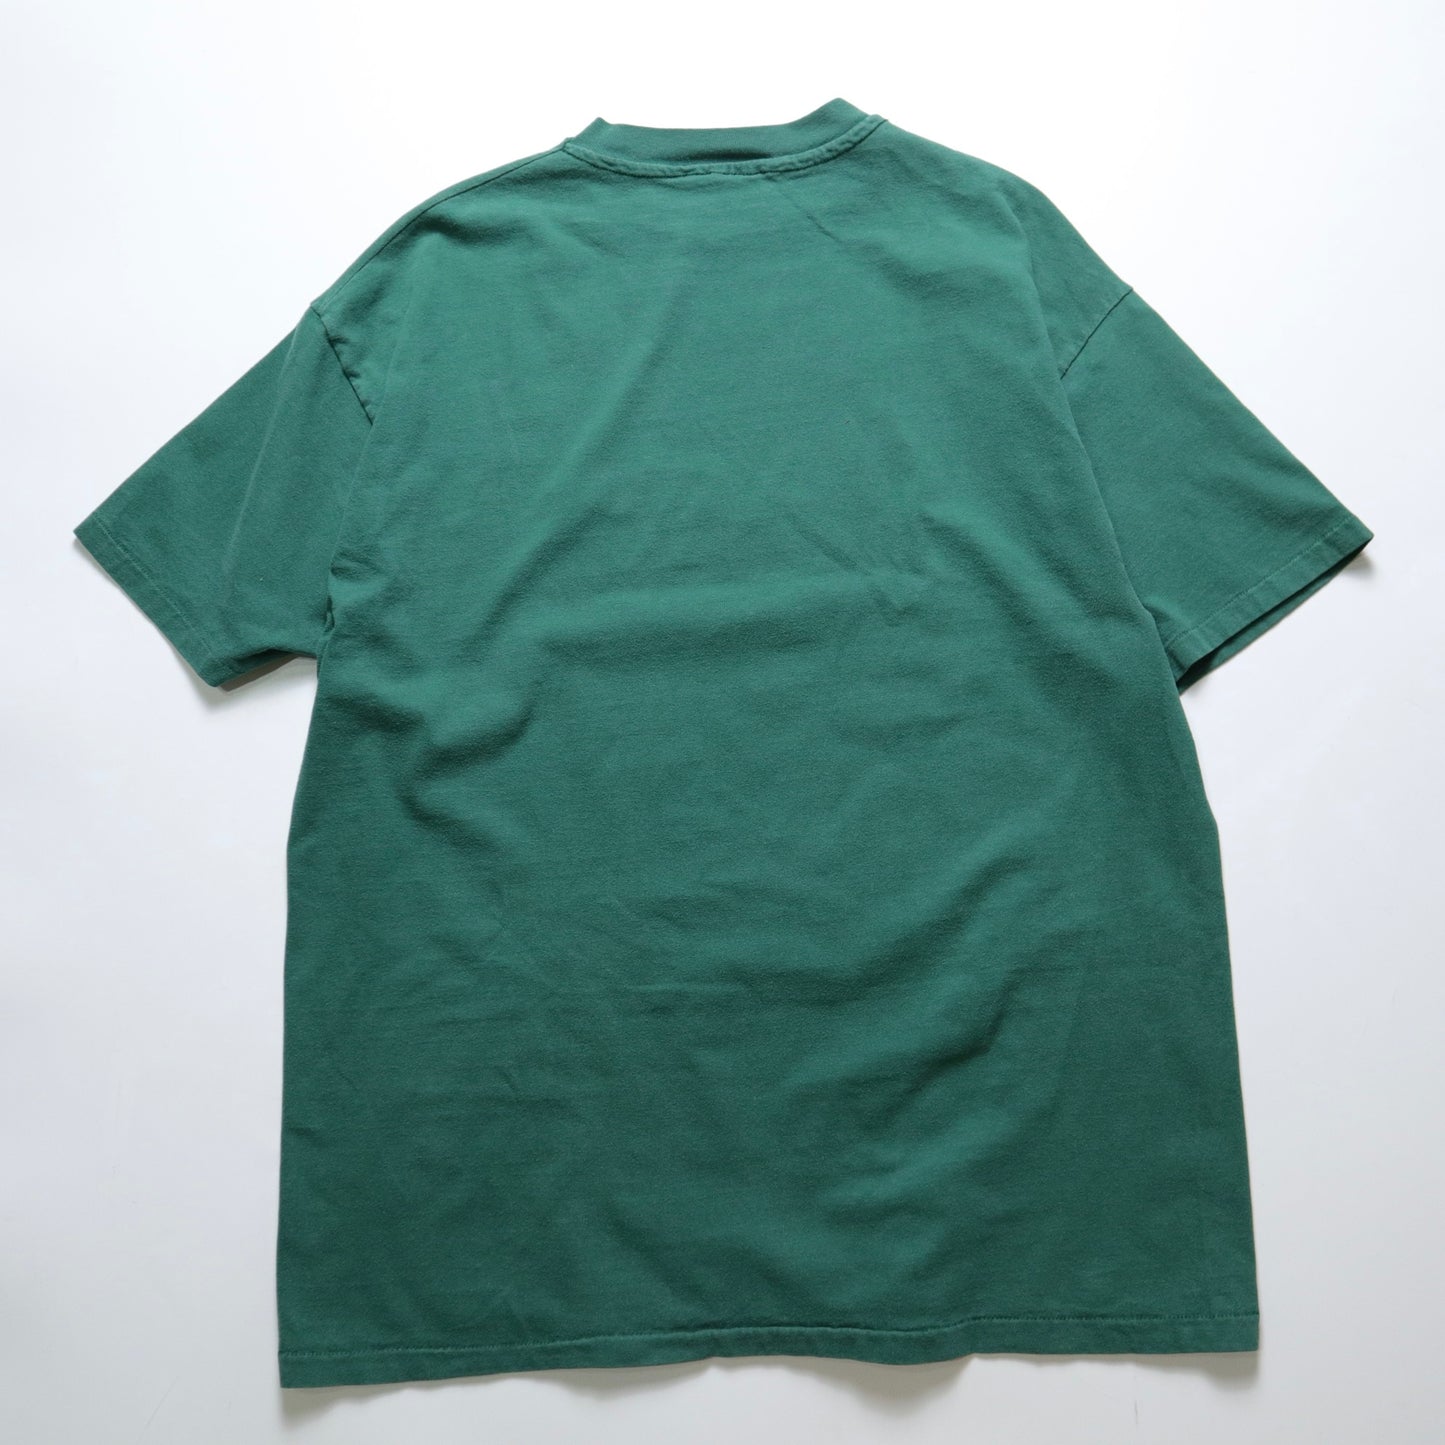 90s Hanes American-made MULCH green washed old offset tee